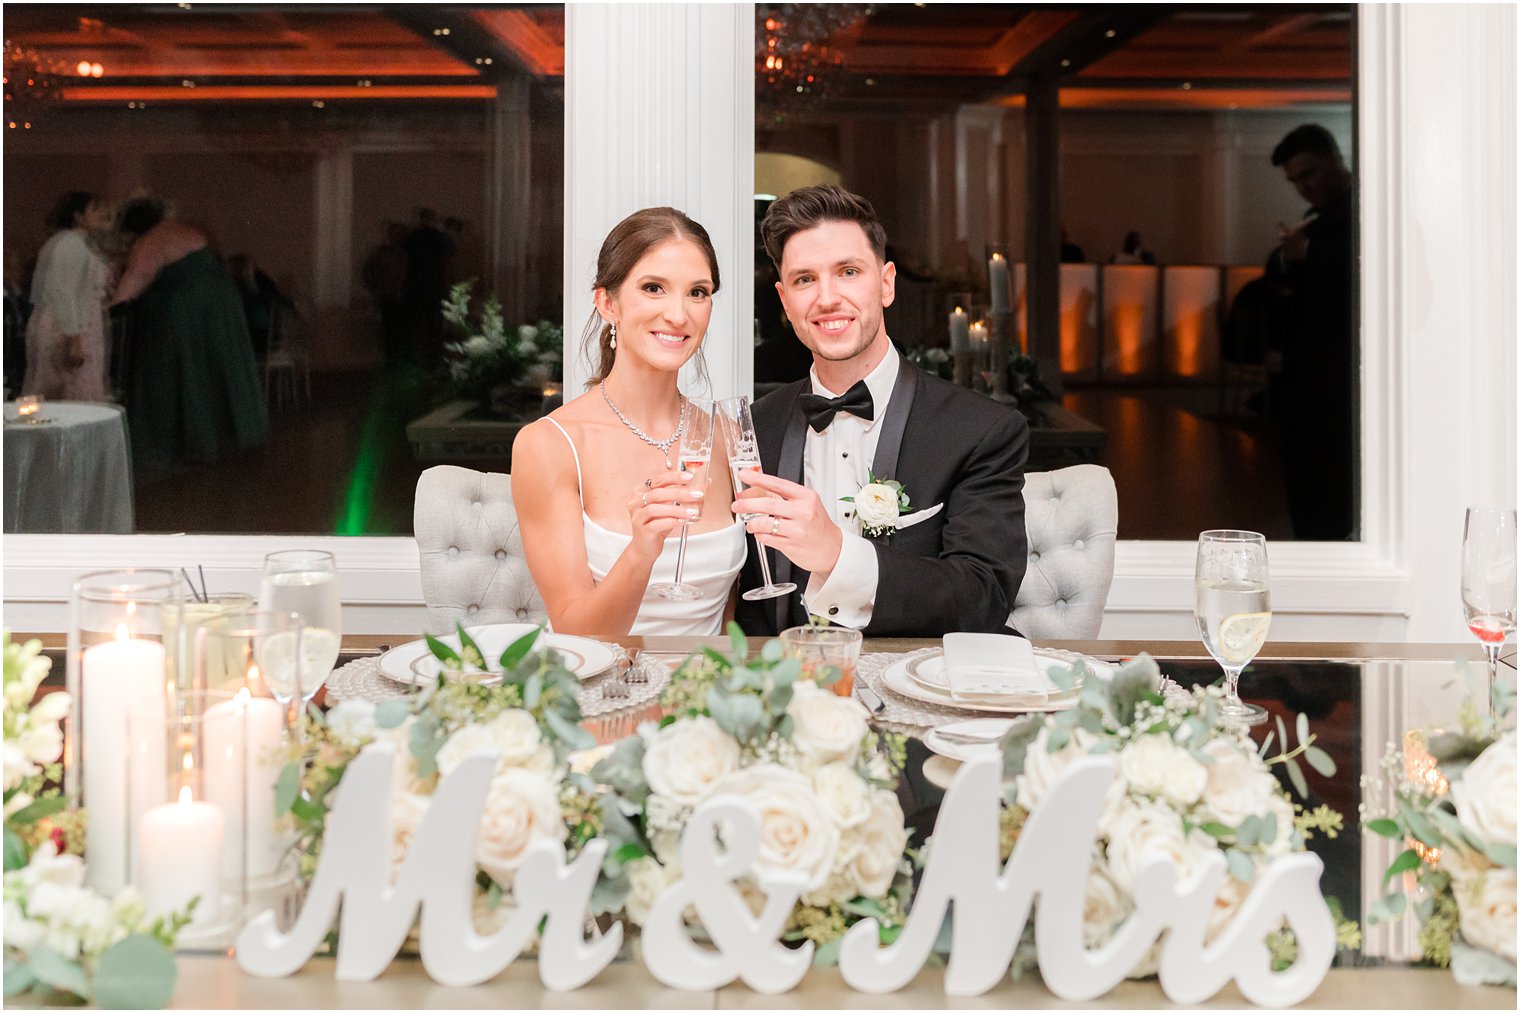 newlyweds sit together at sweetheart table with white Mr and Mrs sign and white roses 